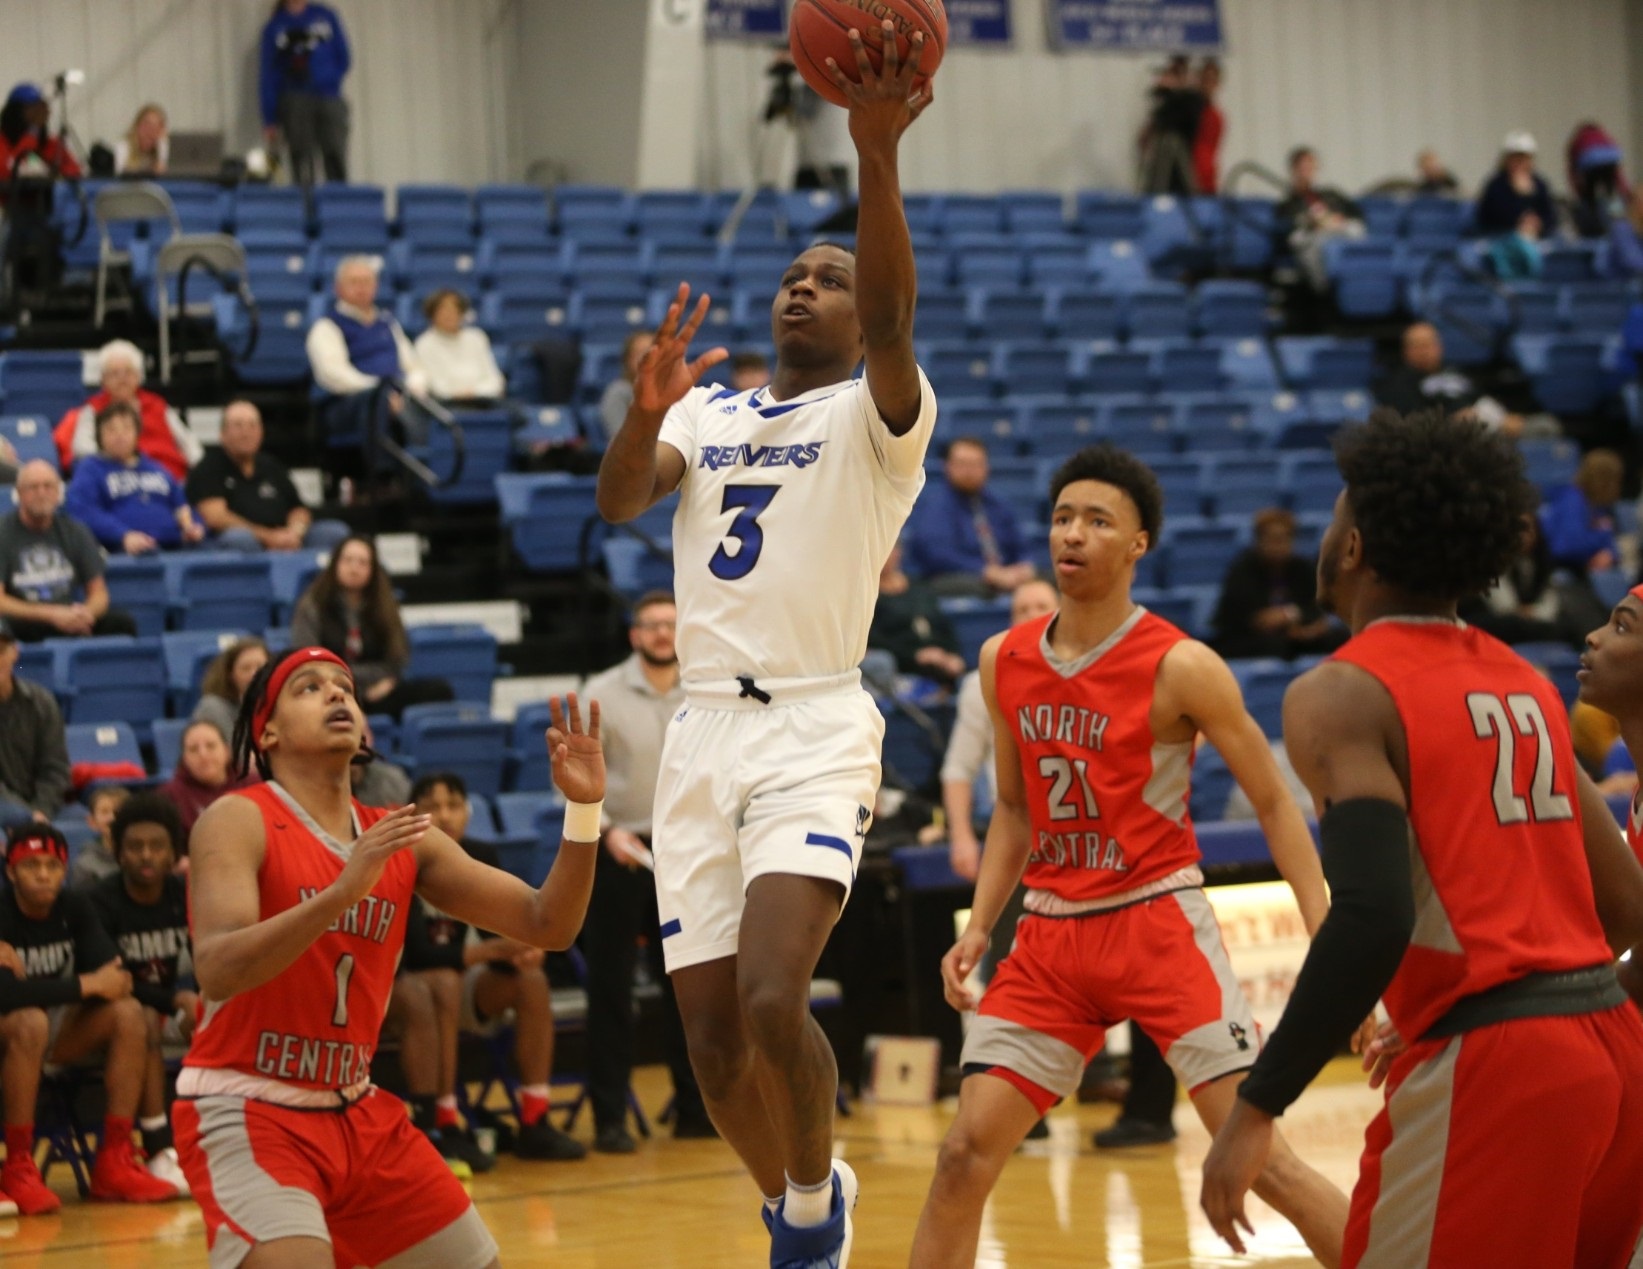 Kaleb "KT" Thornton's 22 points helped Iowa Western win a 102-91 shootout against 25-2 North Central Missouri on Sophomore Night Tuesday (2/18) evening at Reiver Arena.